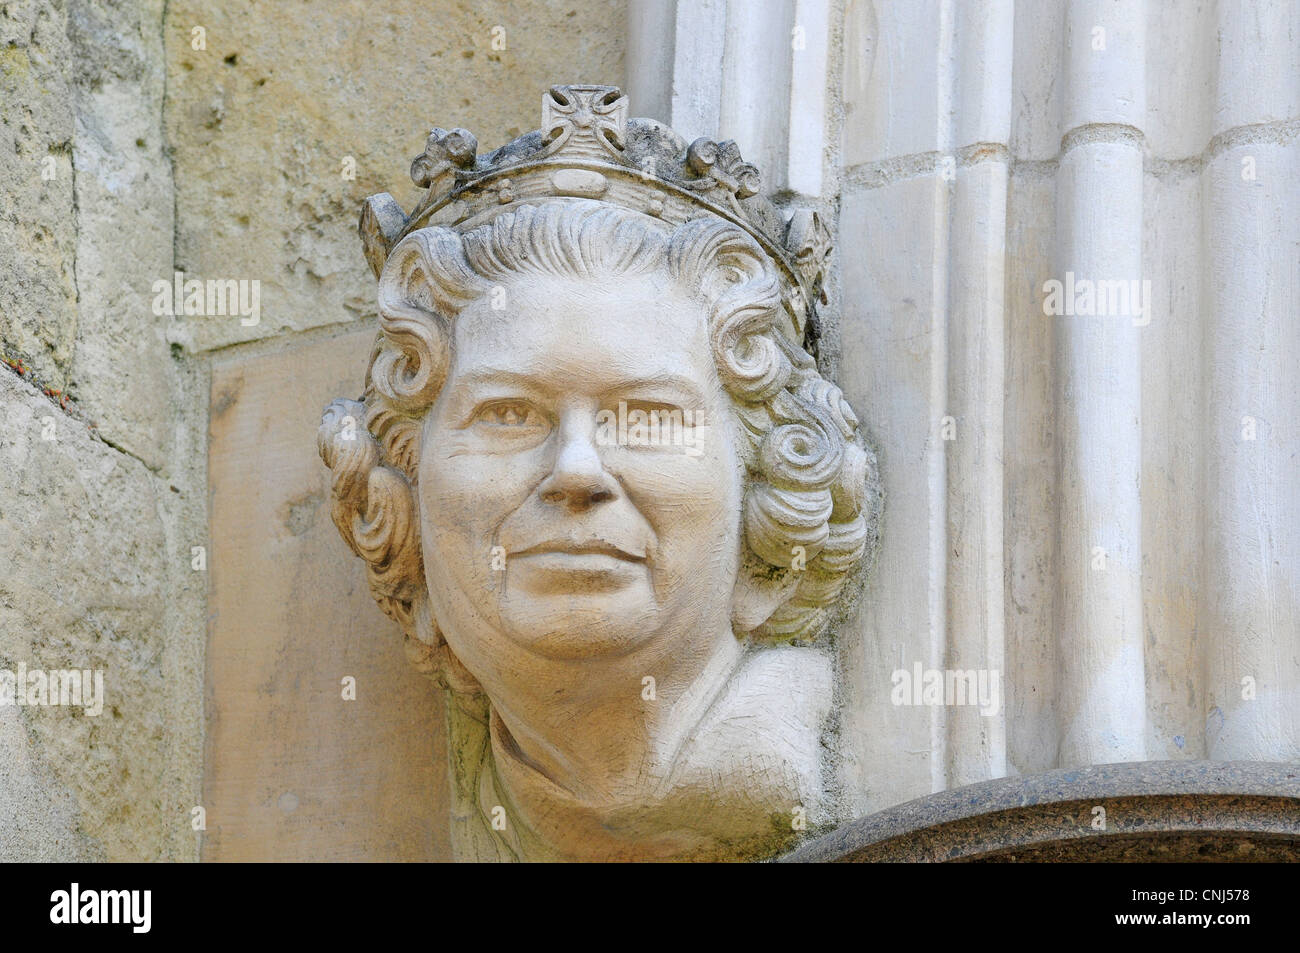 Sculptured head of her majesty Queen Elizabeth II on the West door or Galilee of Chichester Cathedral. Stock Photo